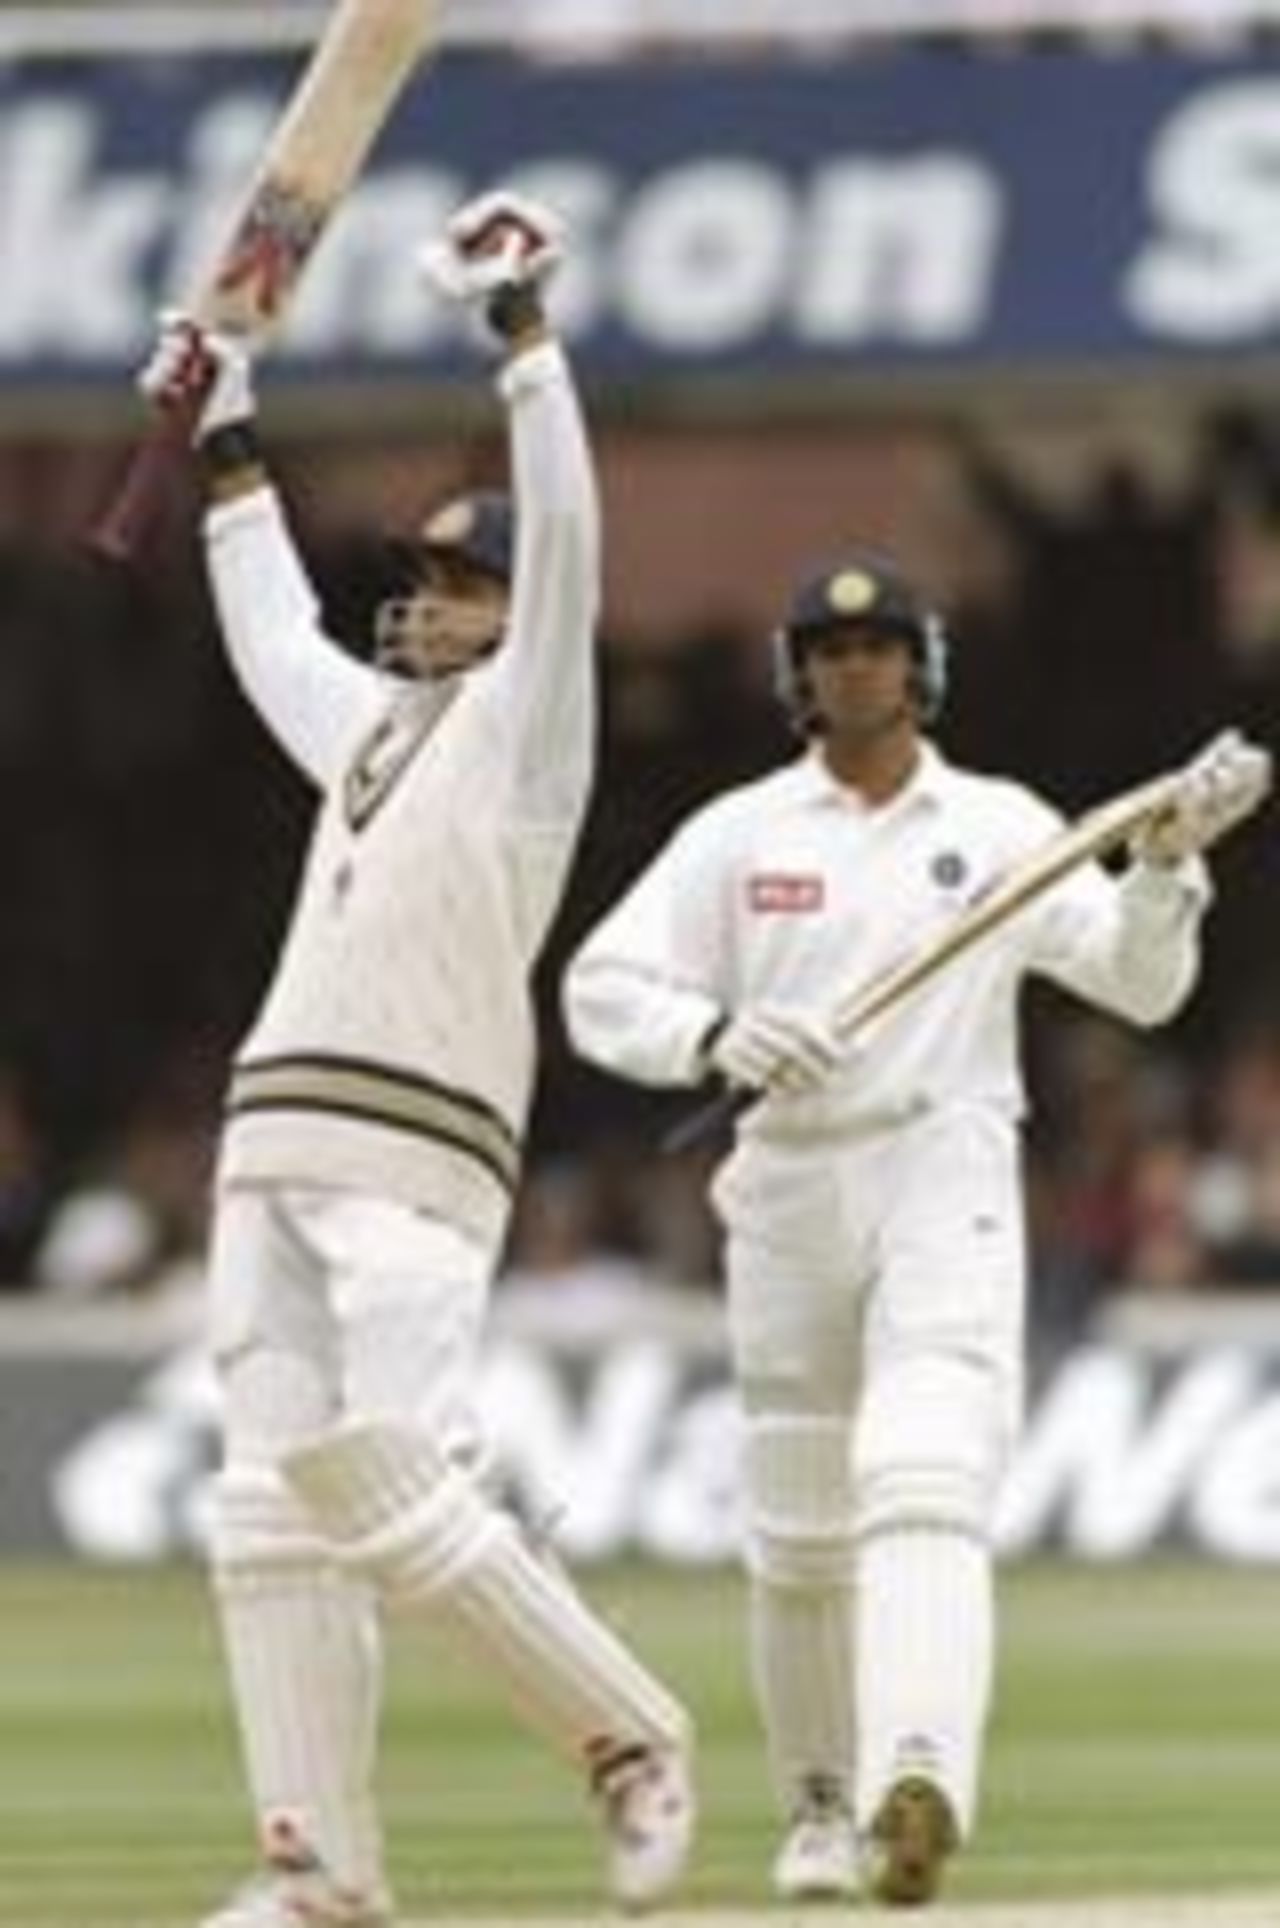 Sourav Ganguly celebrates his debut century, England v India, 2nd Test, Lord's, June 20, 1996